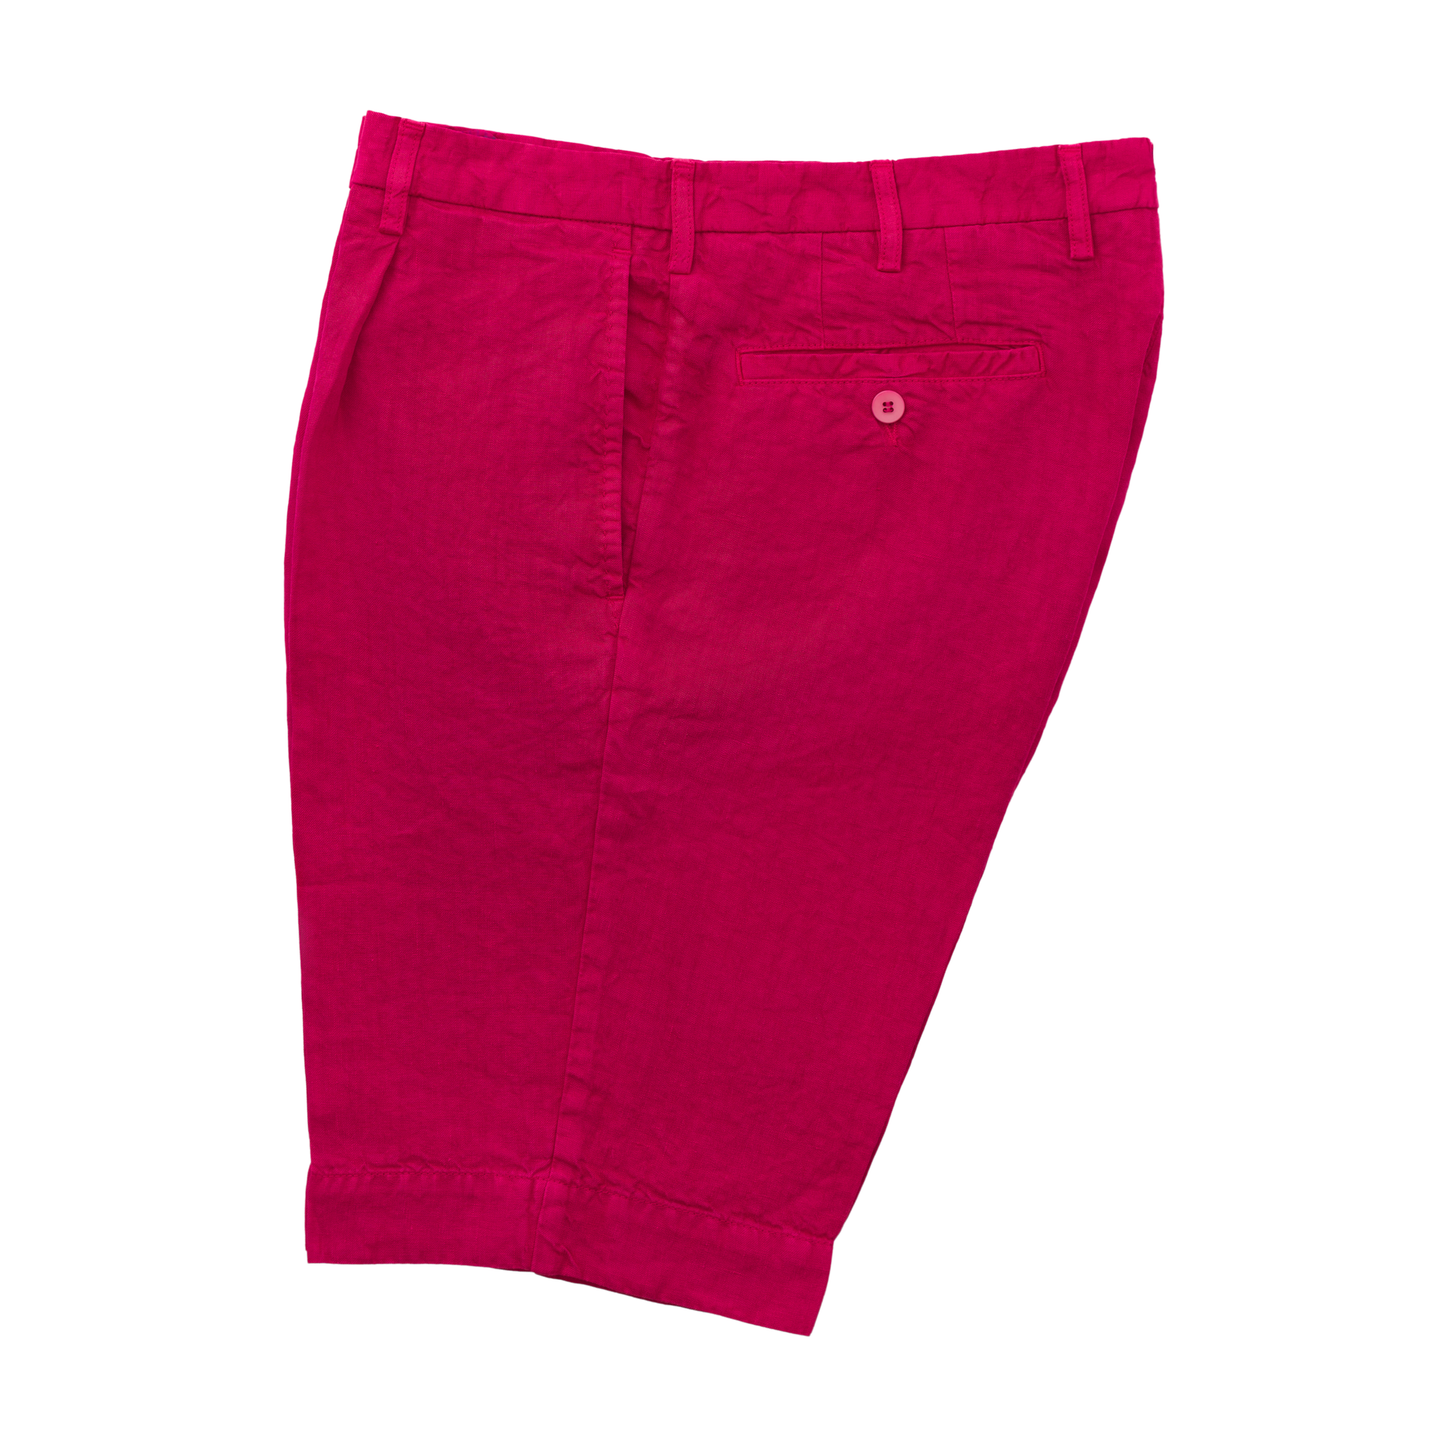 Rota Pleated Linen Bermuda Shorts in Red - SARTALE